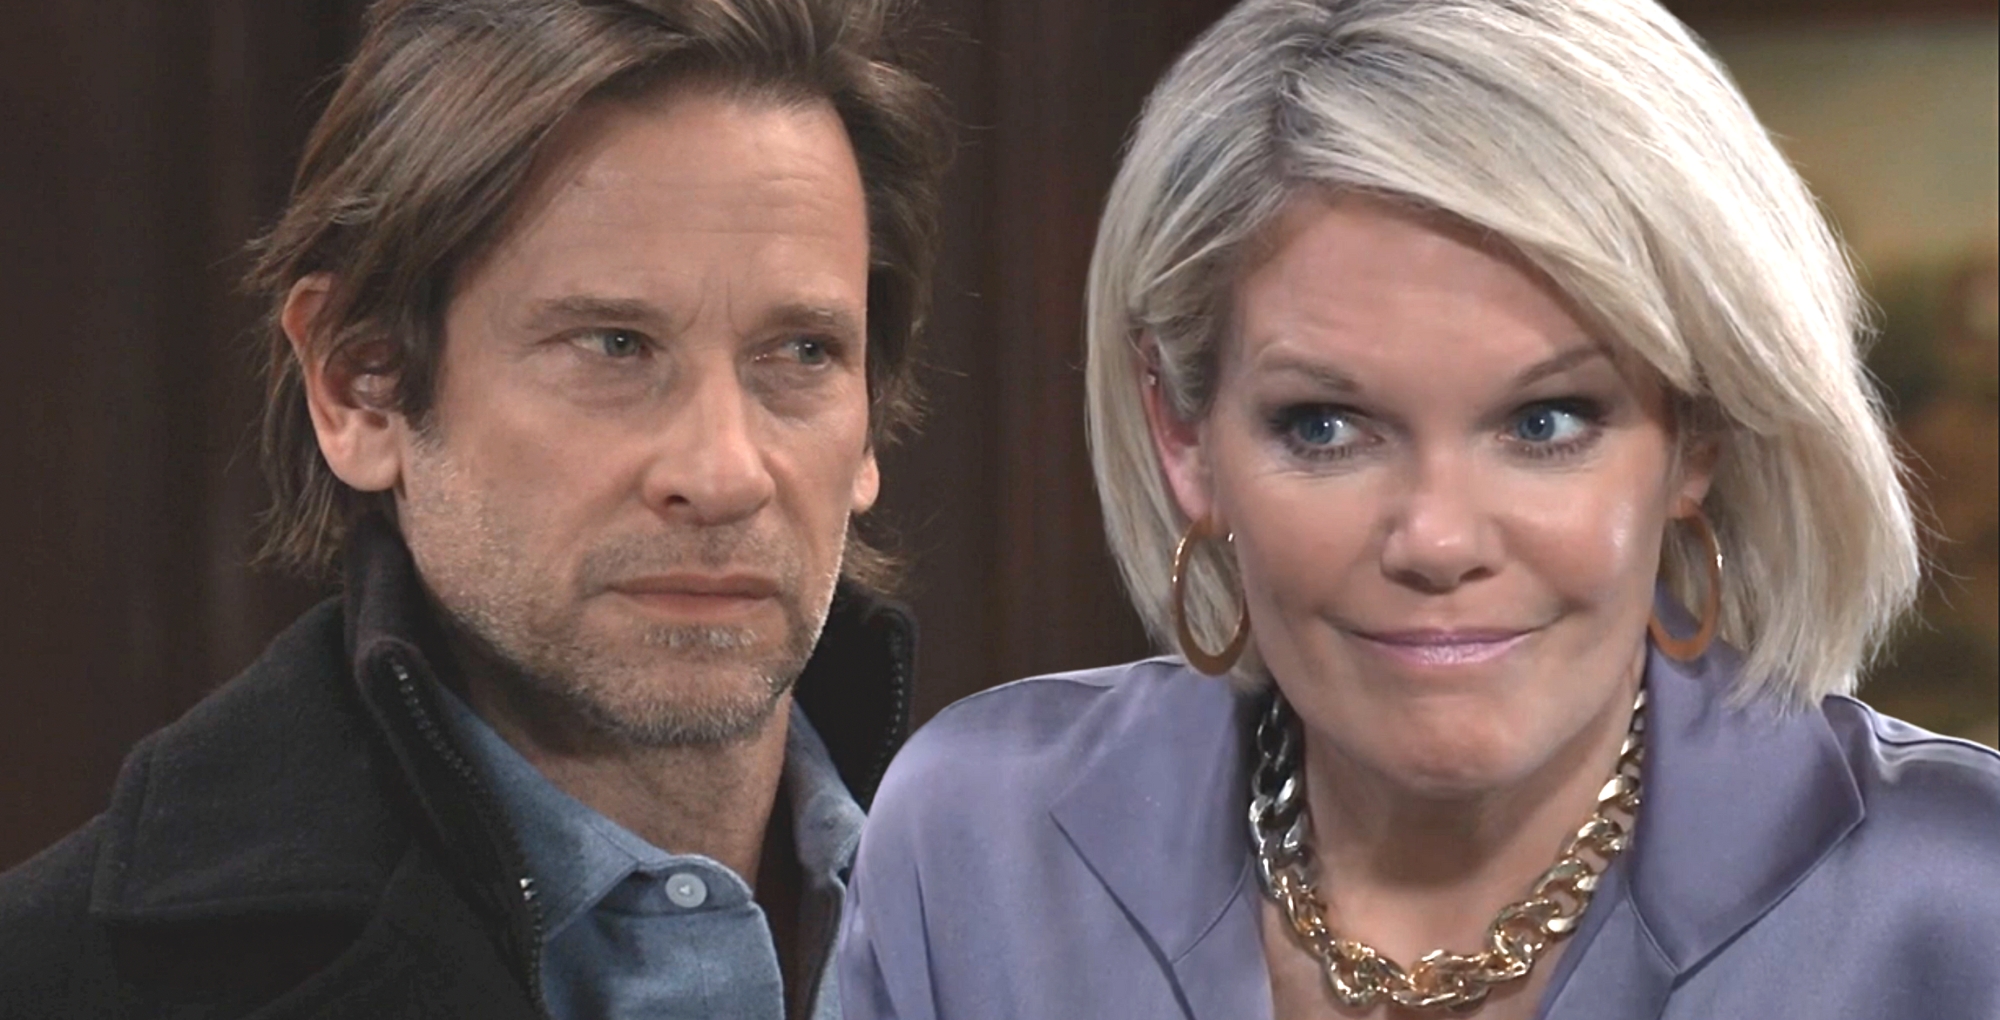 Give General Hospital An A+: Should Ava Jerome and Austin Get Together?